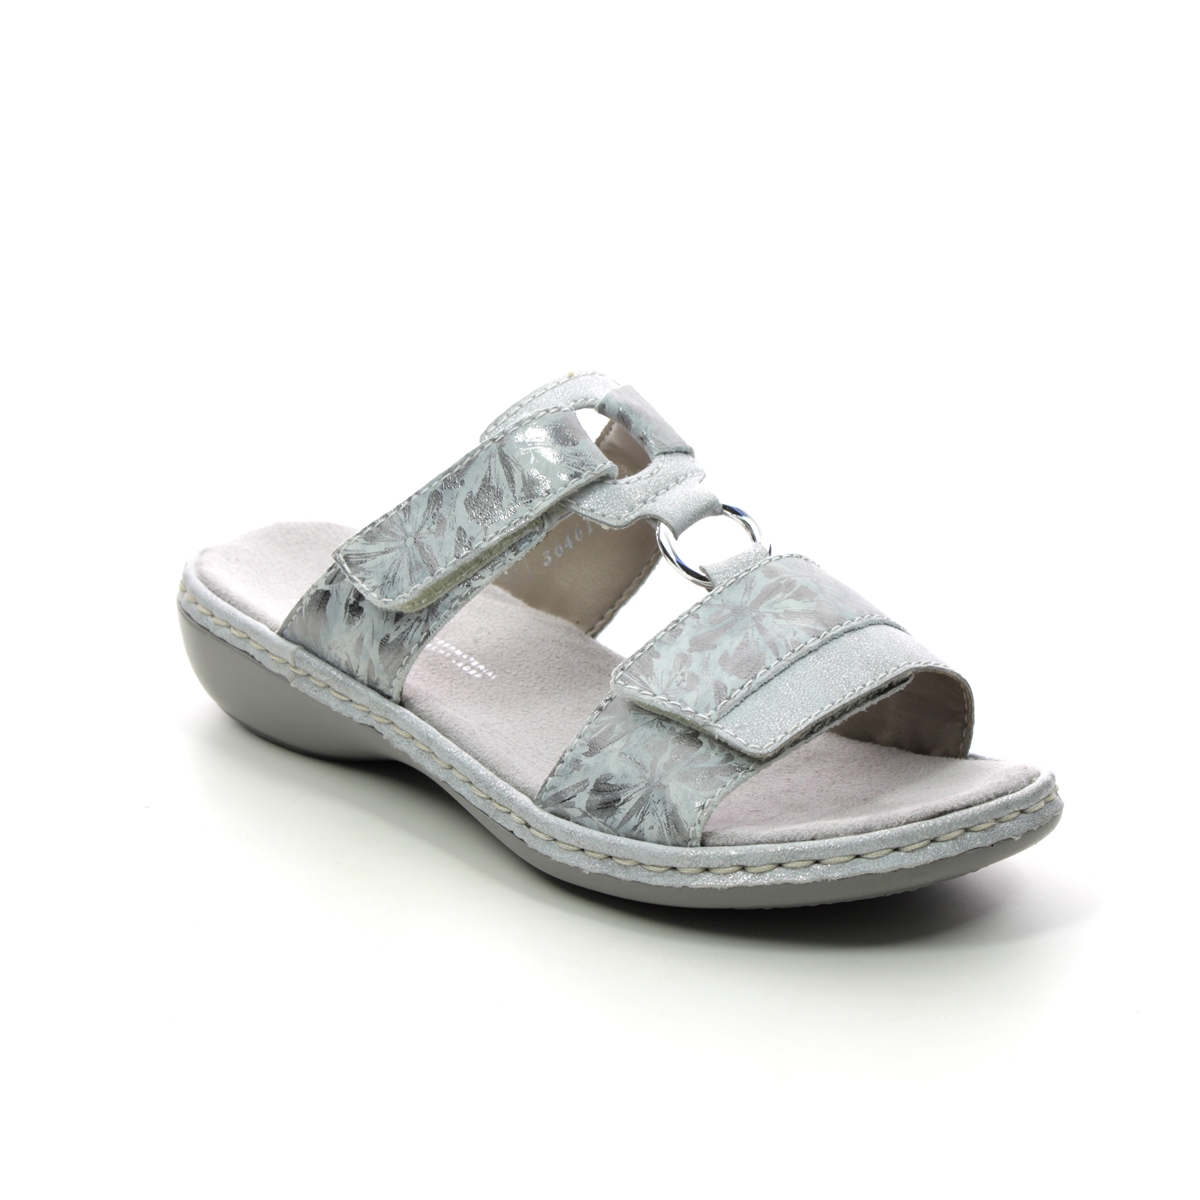 Rieker 659X6-80 Silver Glitz Womens Slide Sandals in a Plain Leather and Man-made in Size 39